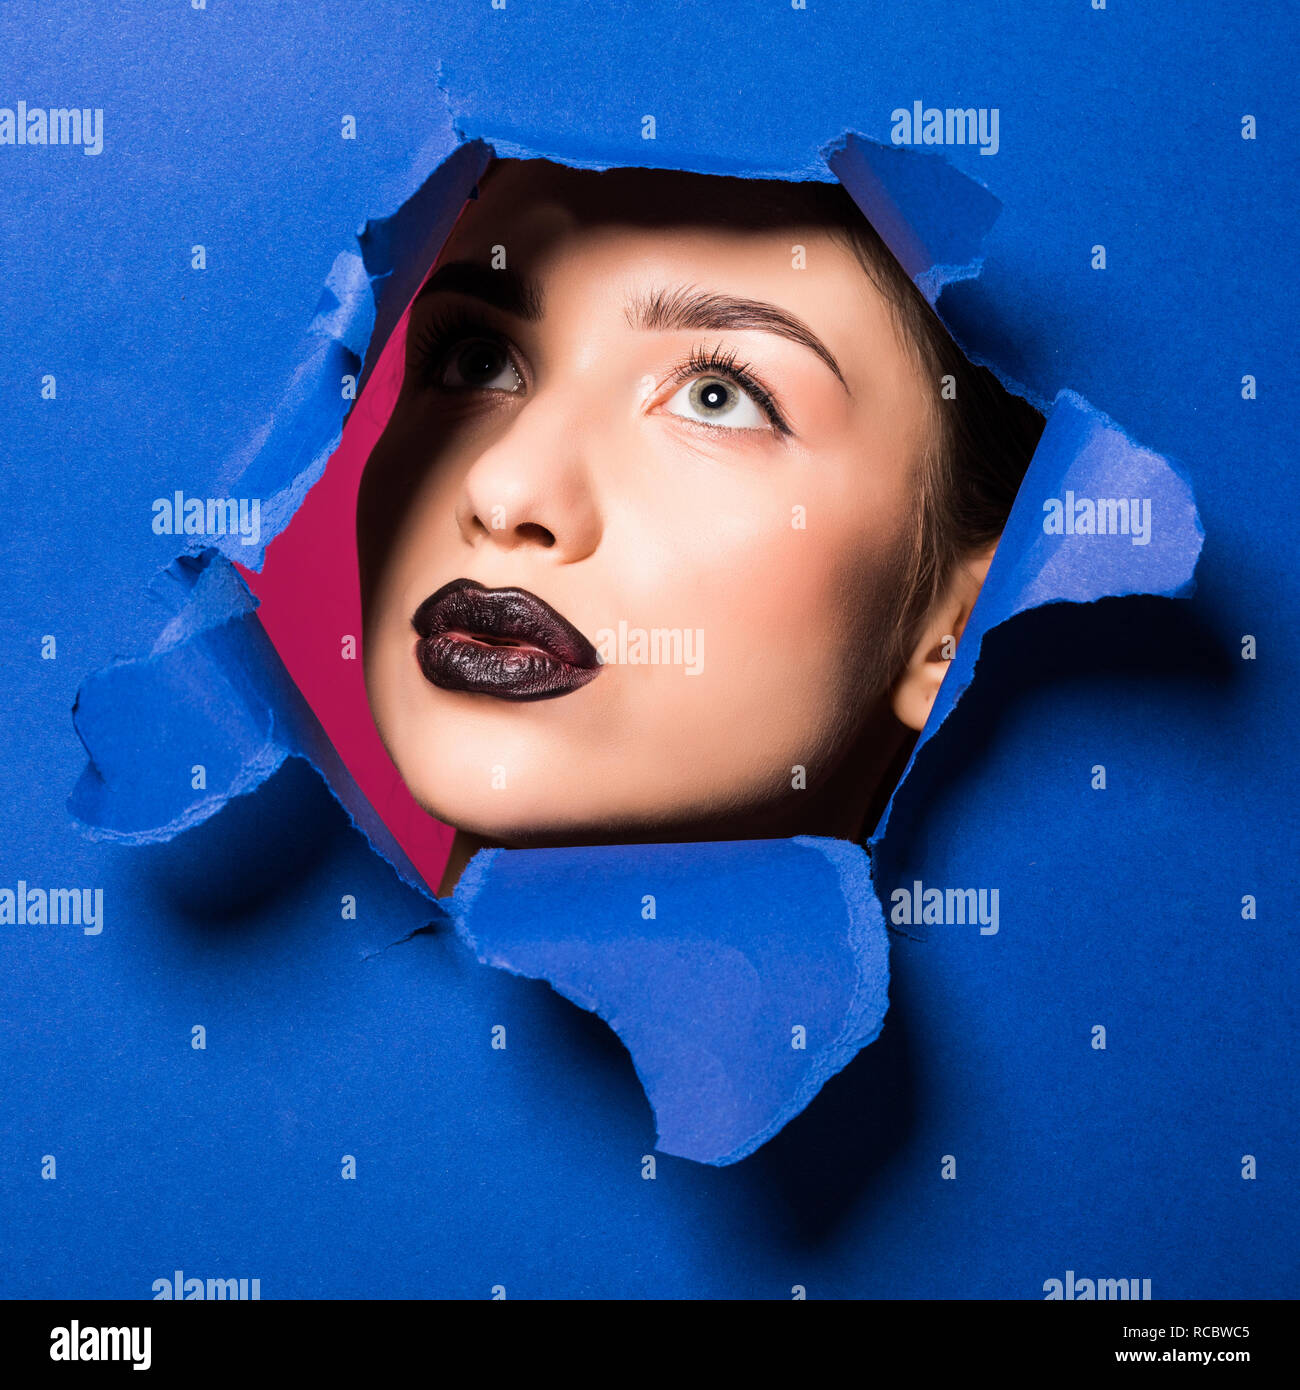 The Face Of Young Beautiful Girl With A Bright Make Up And Puffy Dark Lips Peers Into A Hole In Blue Paper Stock Photo Alamy